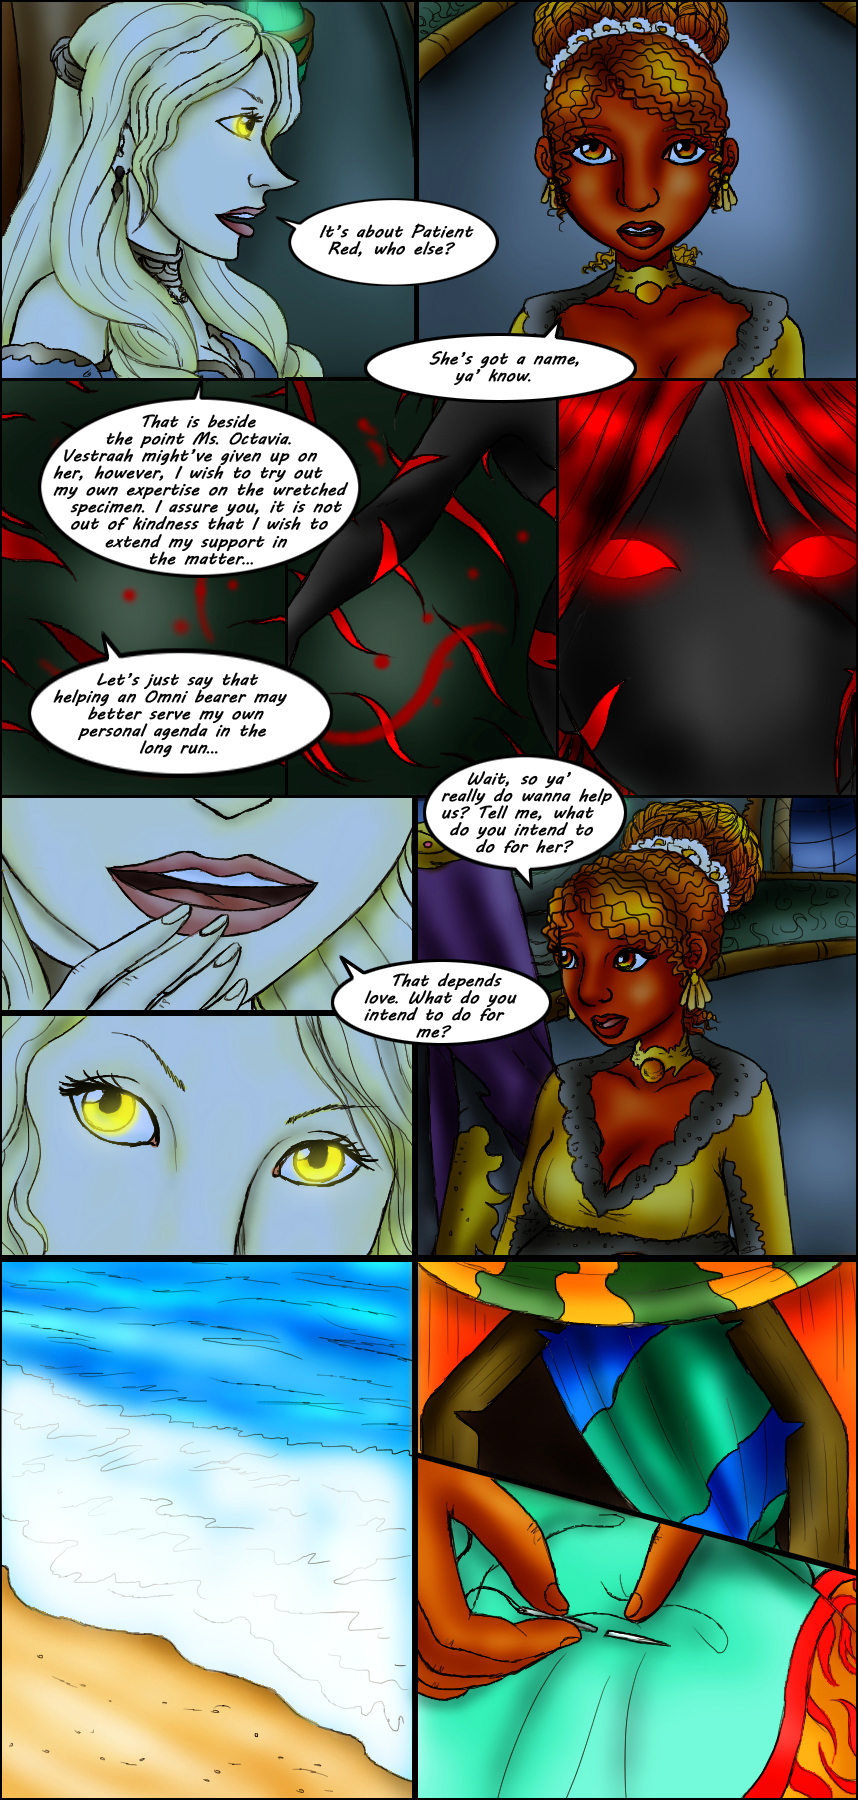 Page 198 – Out Of Kindness